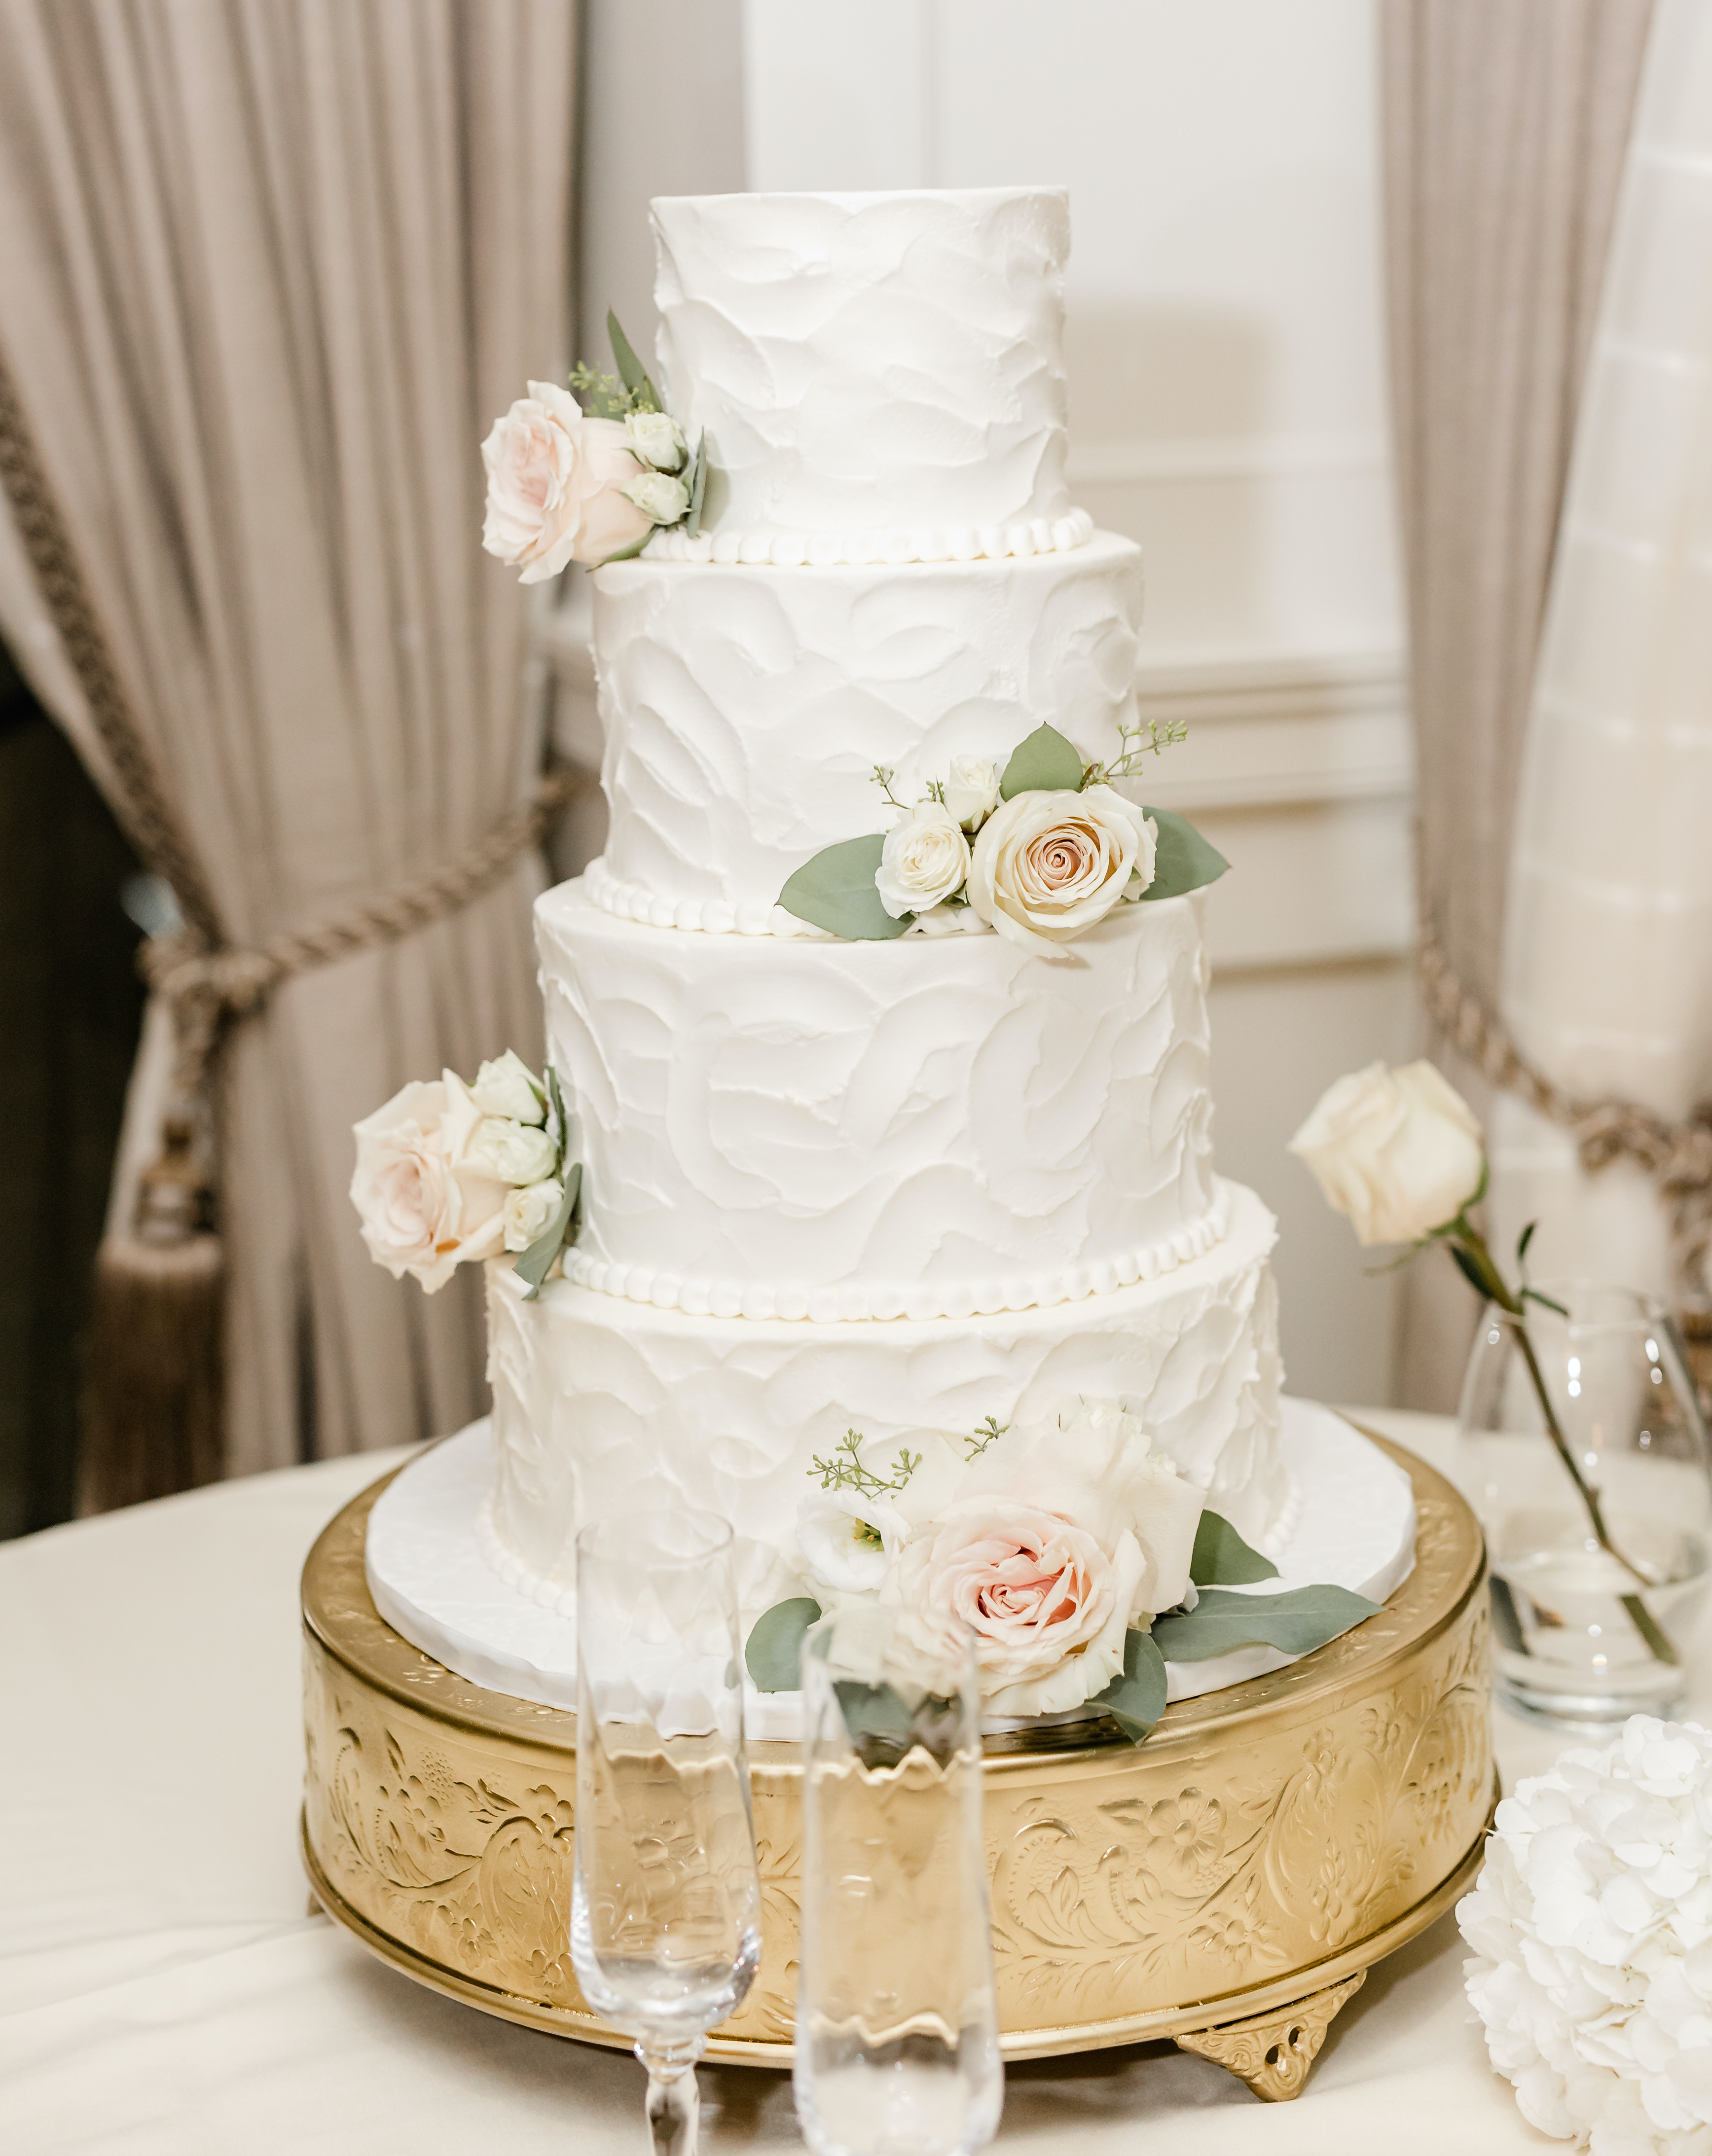 A bride and groom's blush and sage wedding cake with four-tiers at The Petroleum Club of Houston.